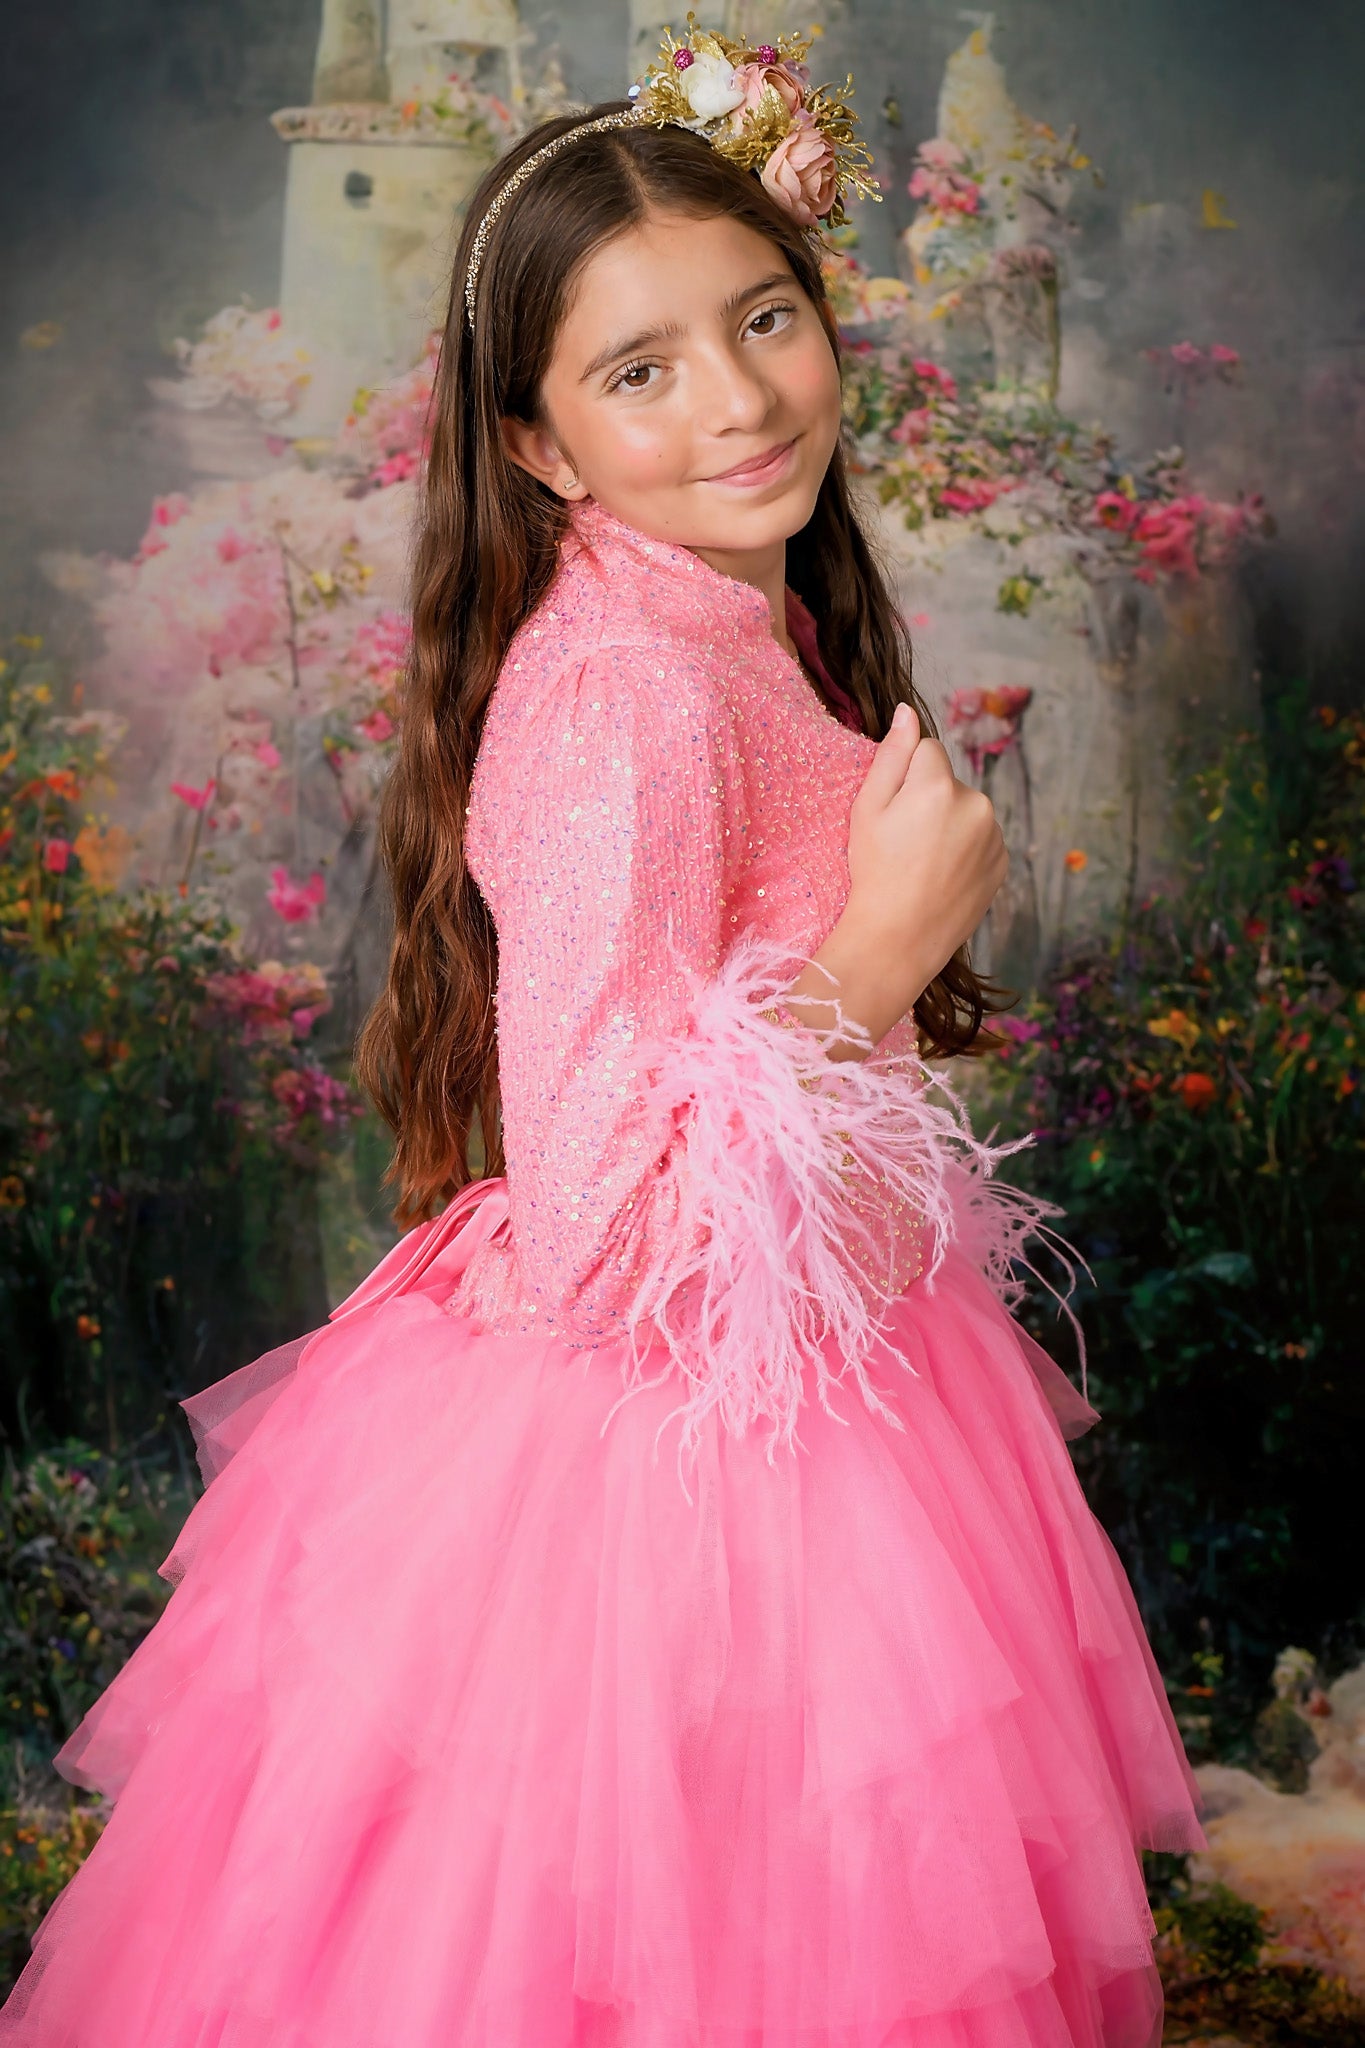 Christmas pink dresses, High low dresses, dresses for photography sessions, rental gowns, dream dress sessions